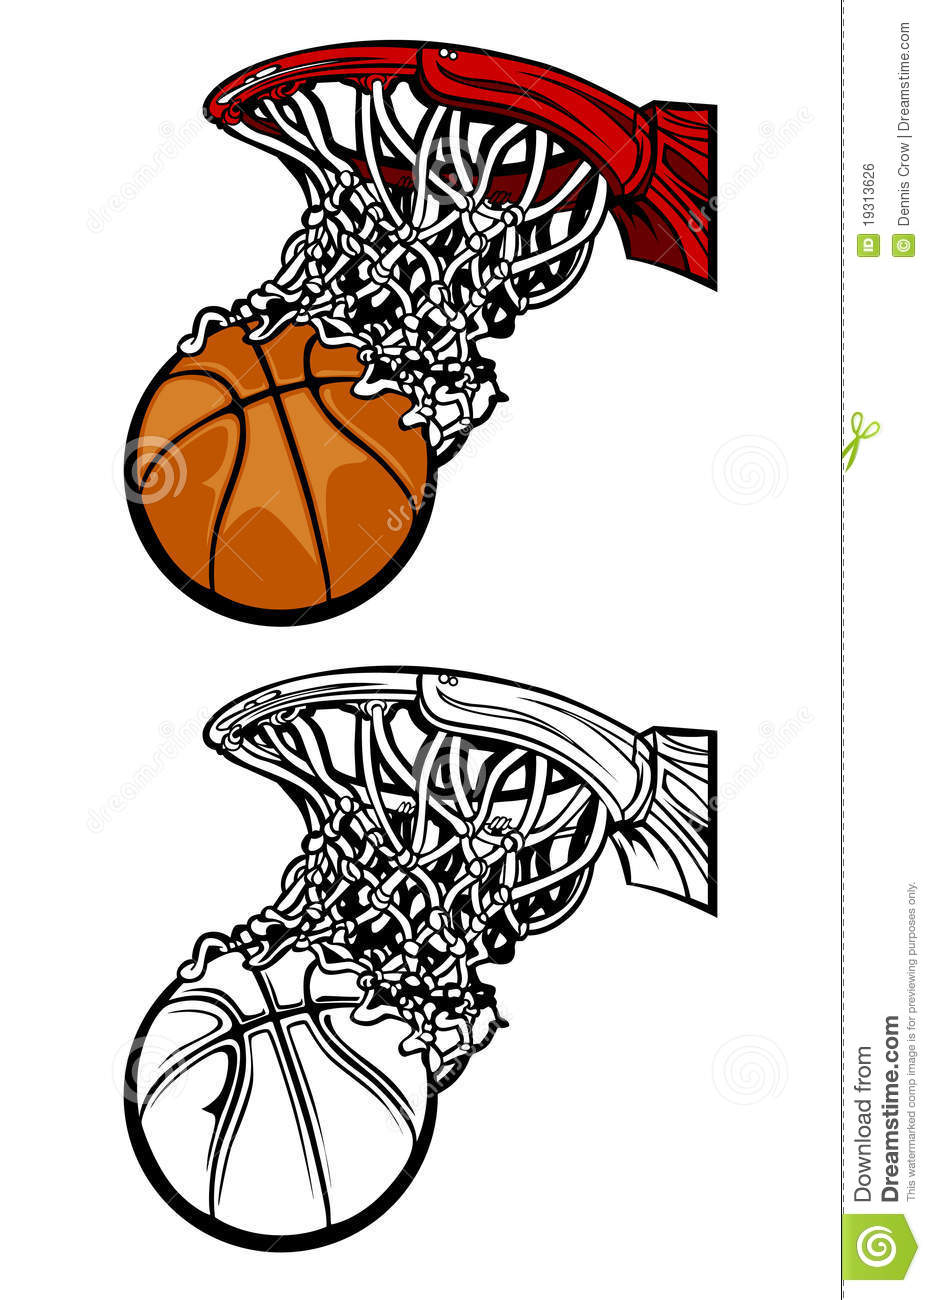 Basketball Hoop Silhouettes Royalty Free Stock Image   Image  19313626